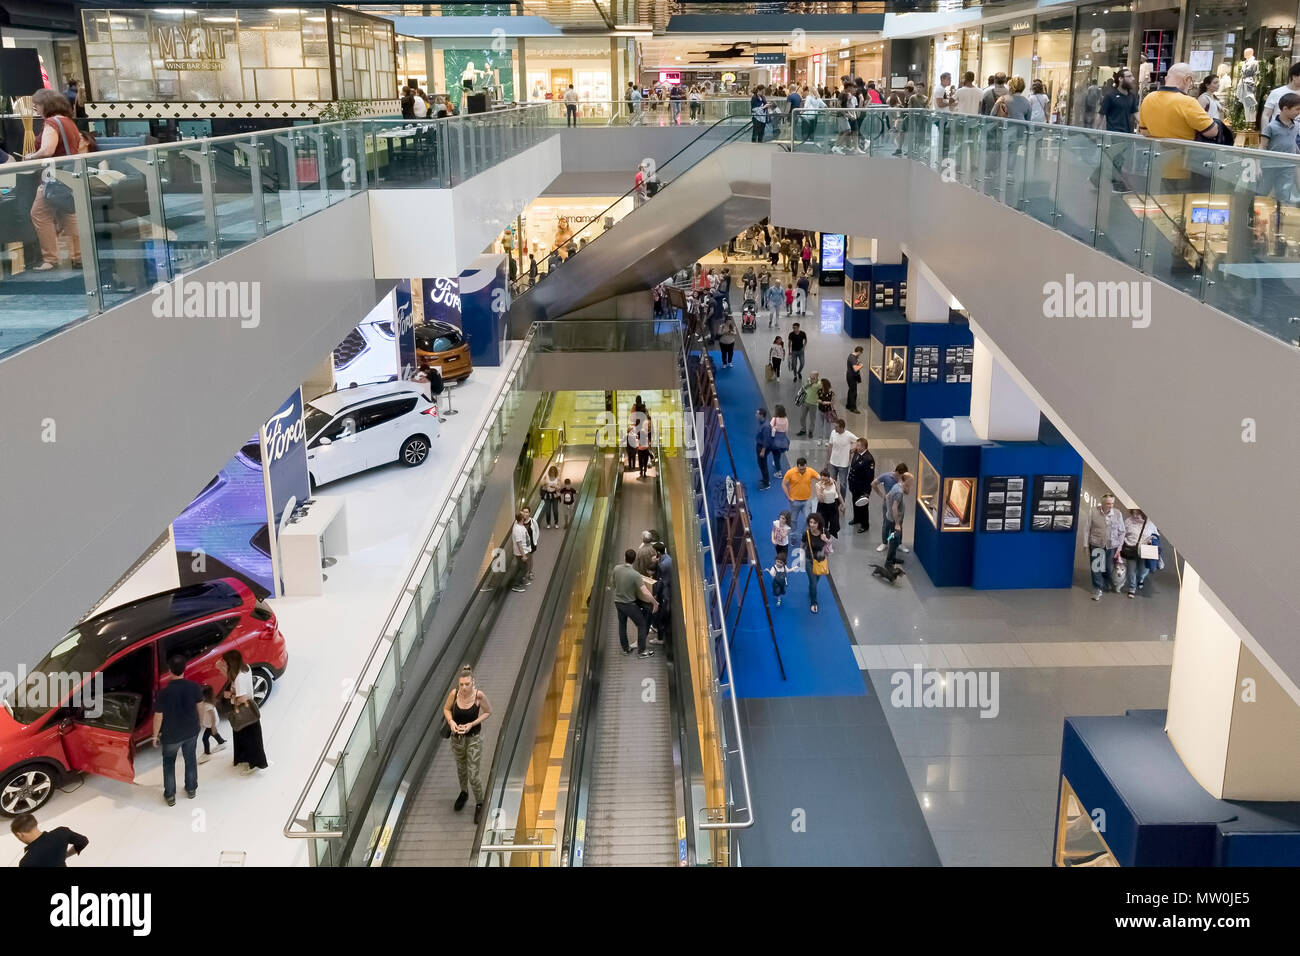 Rome, Italy - 25 May 2018: People go shopping inside the "Porta di Roma" shopping  center. The spaces with the various shops are developed on several f Stock  Photo - Alamy